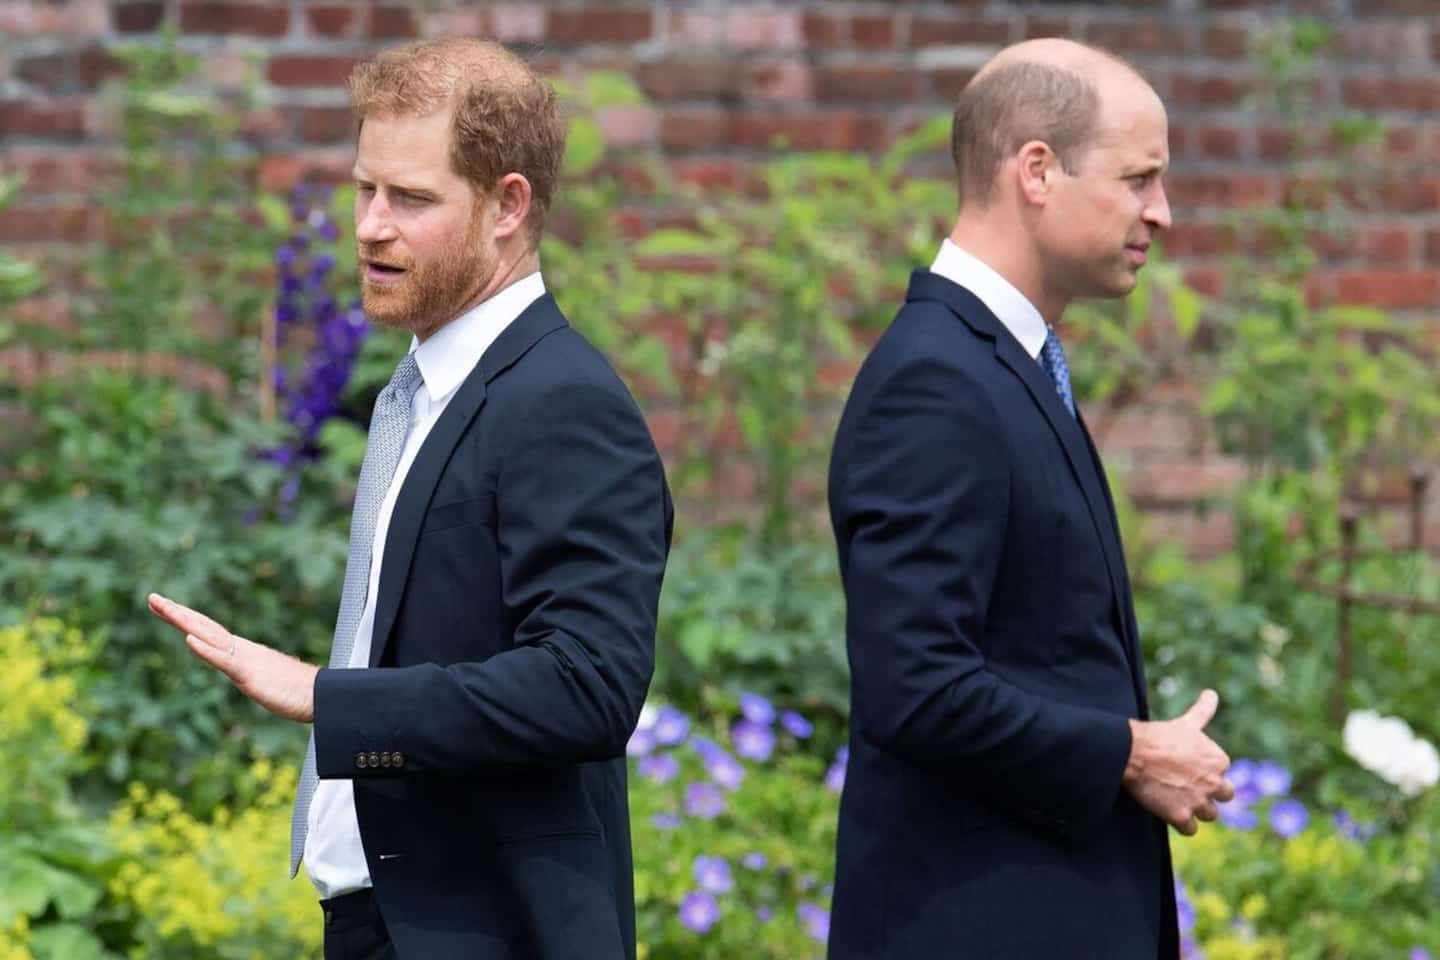 William and Harry: reconciliation seems impossible between the brothers who have become enemies